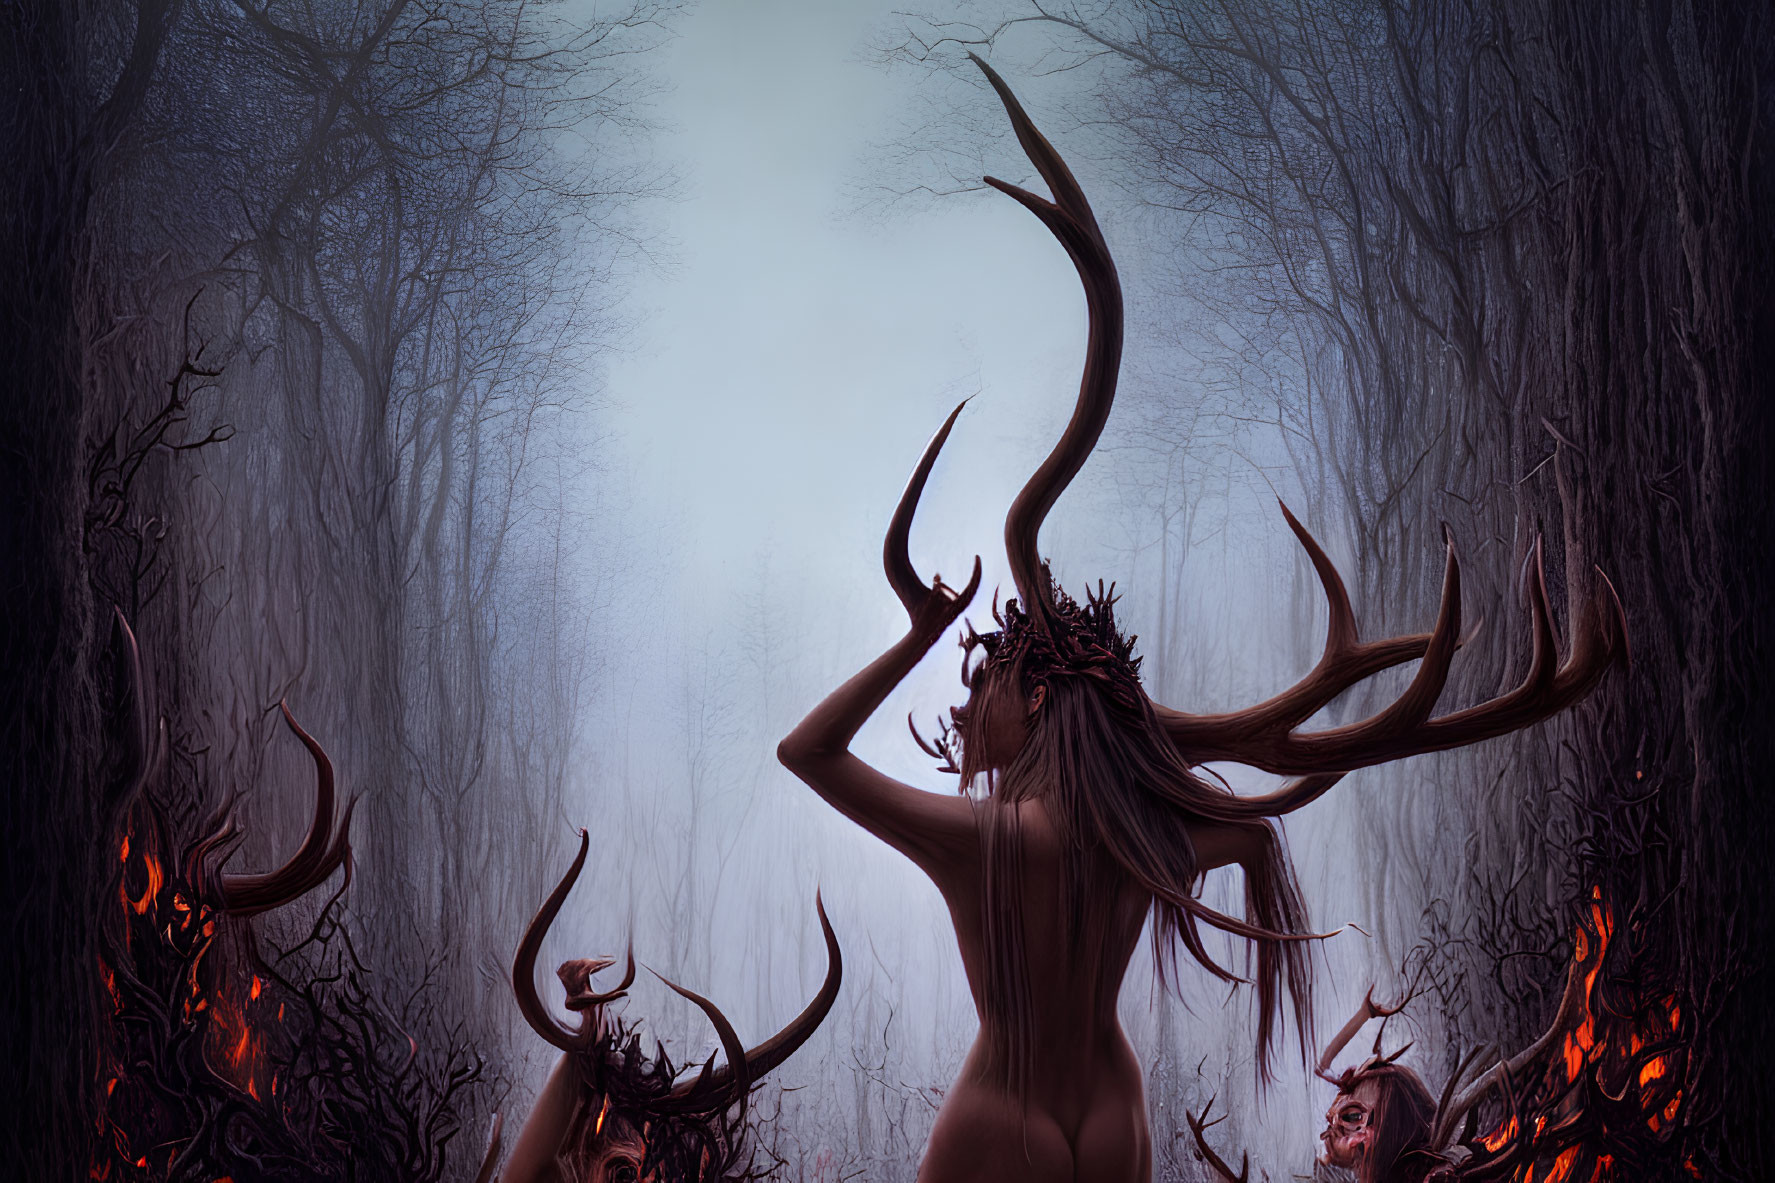 Mystical forest with antlered figure, fiery-eyed creatures